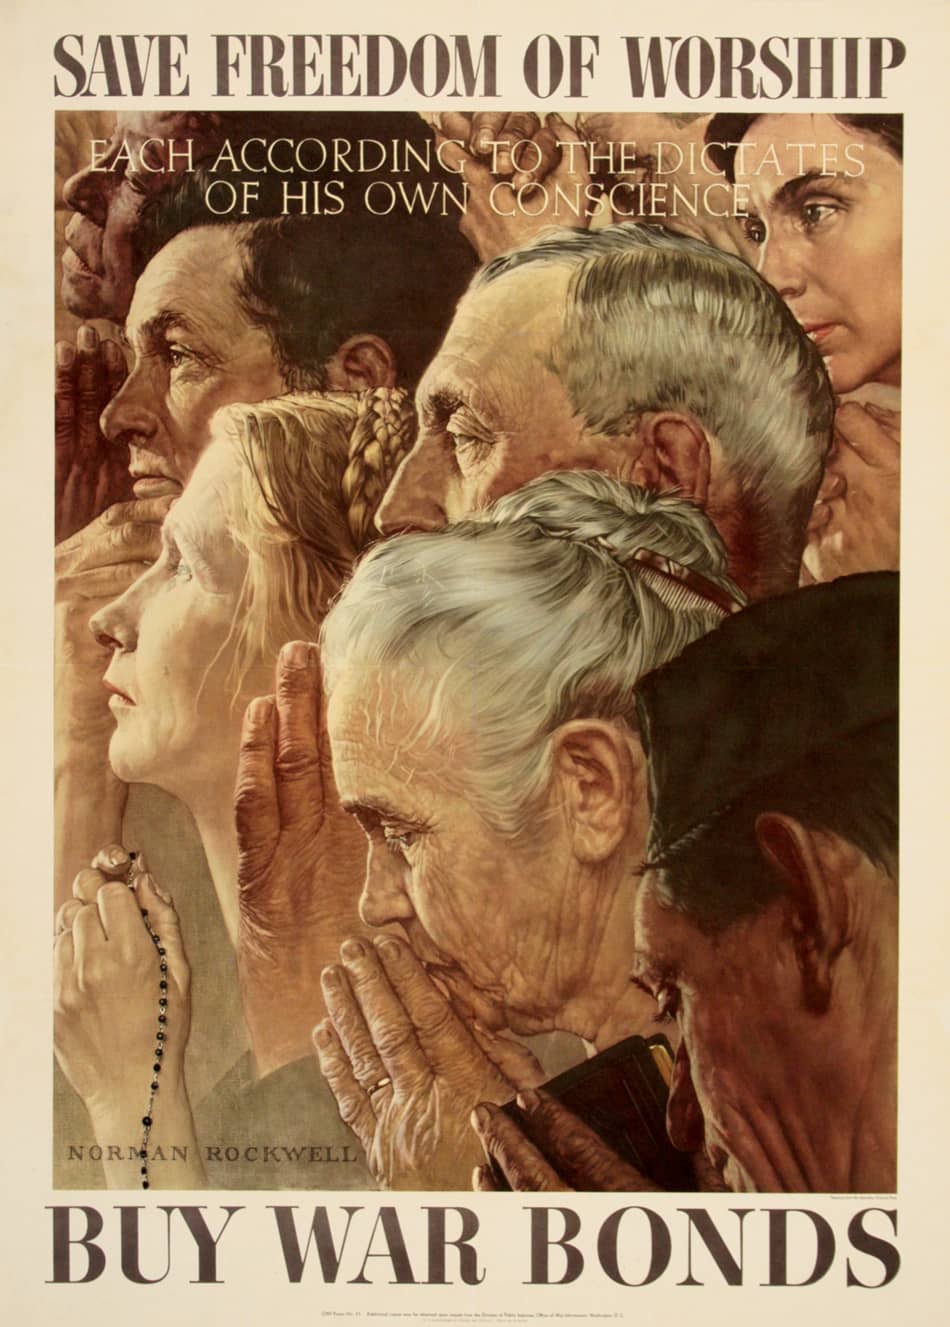 Norman Rockwell Original Freedom of Worship Poster from 1943